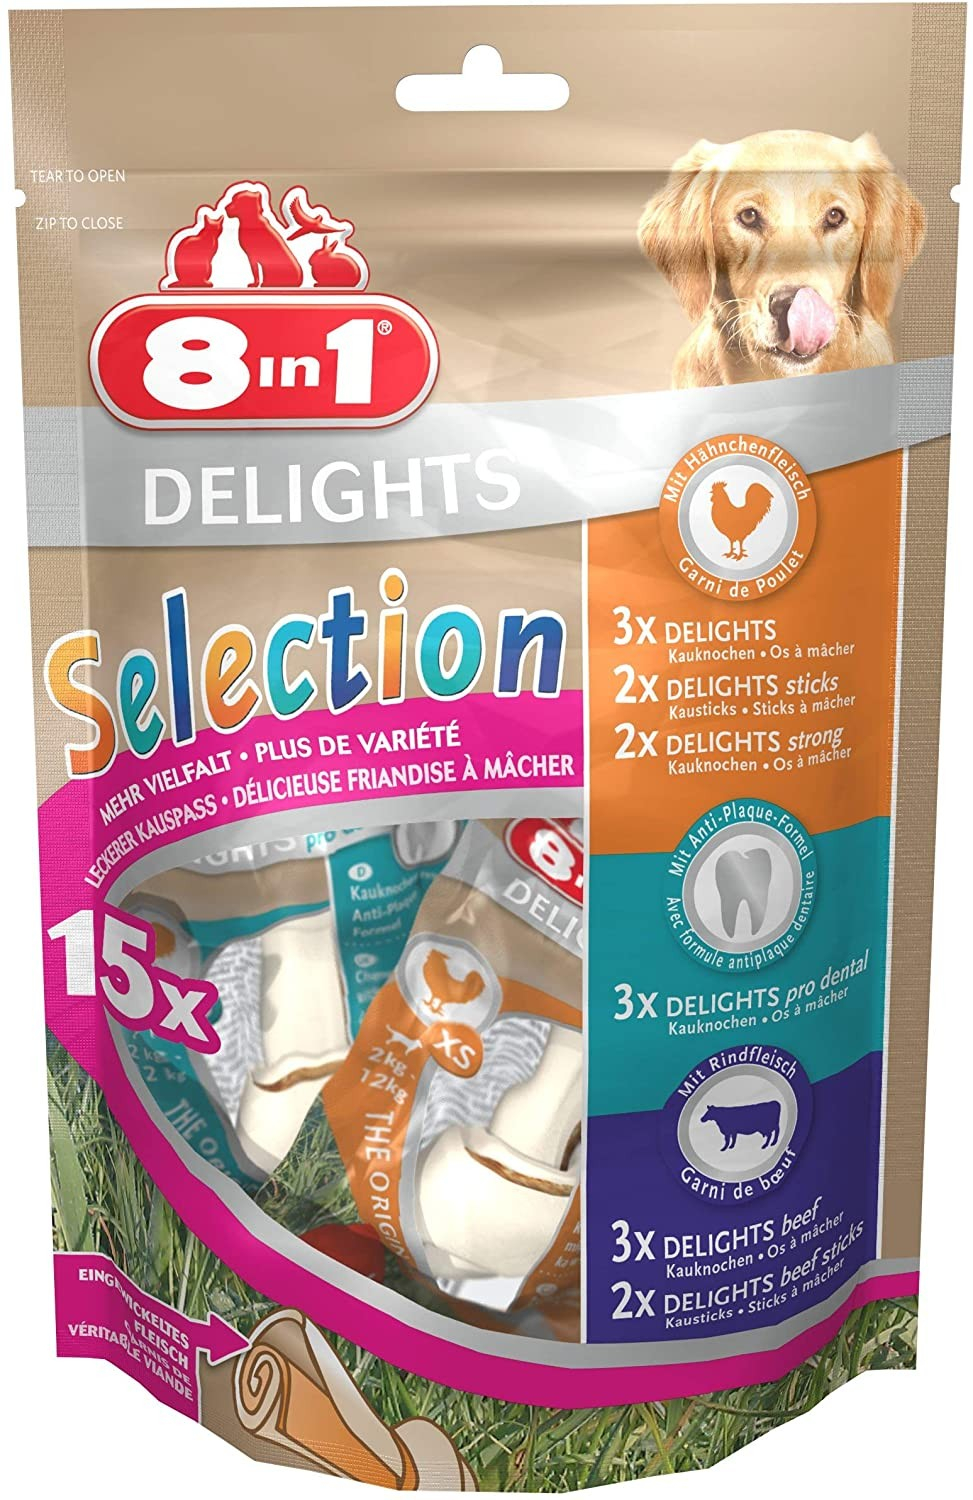 8in1 Delights Selection Value Bag